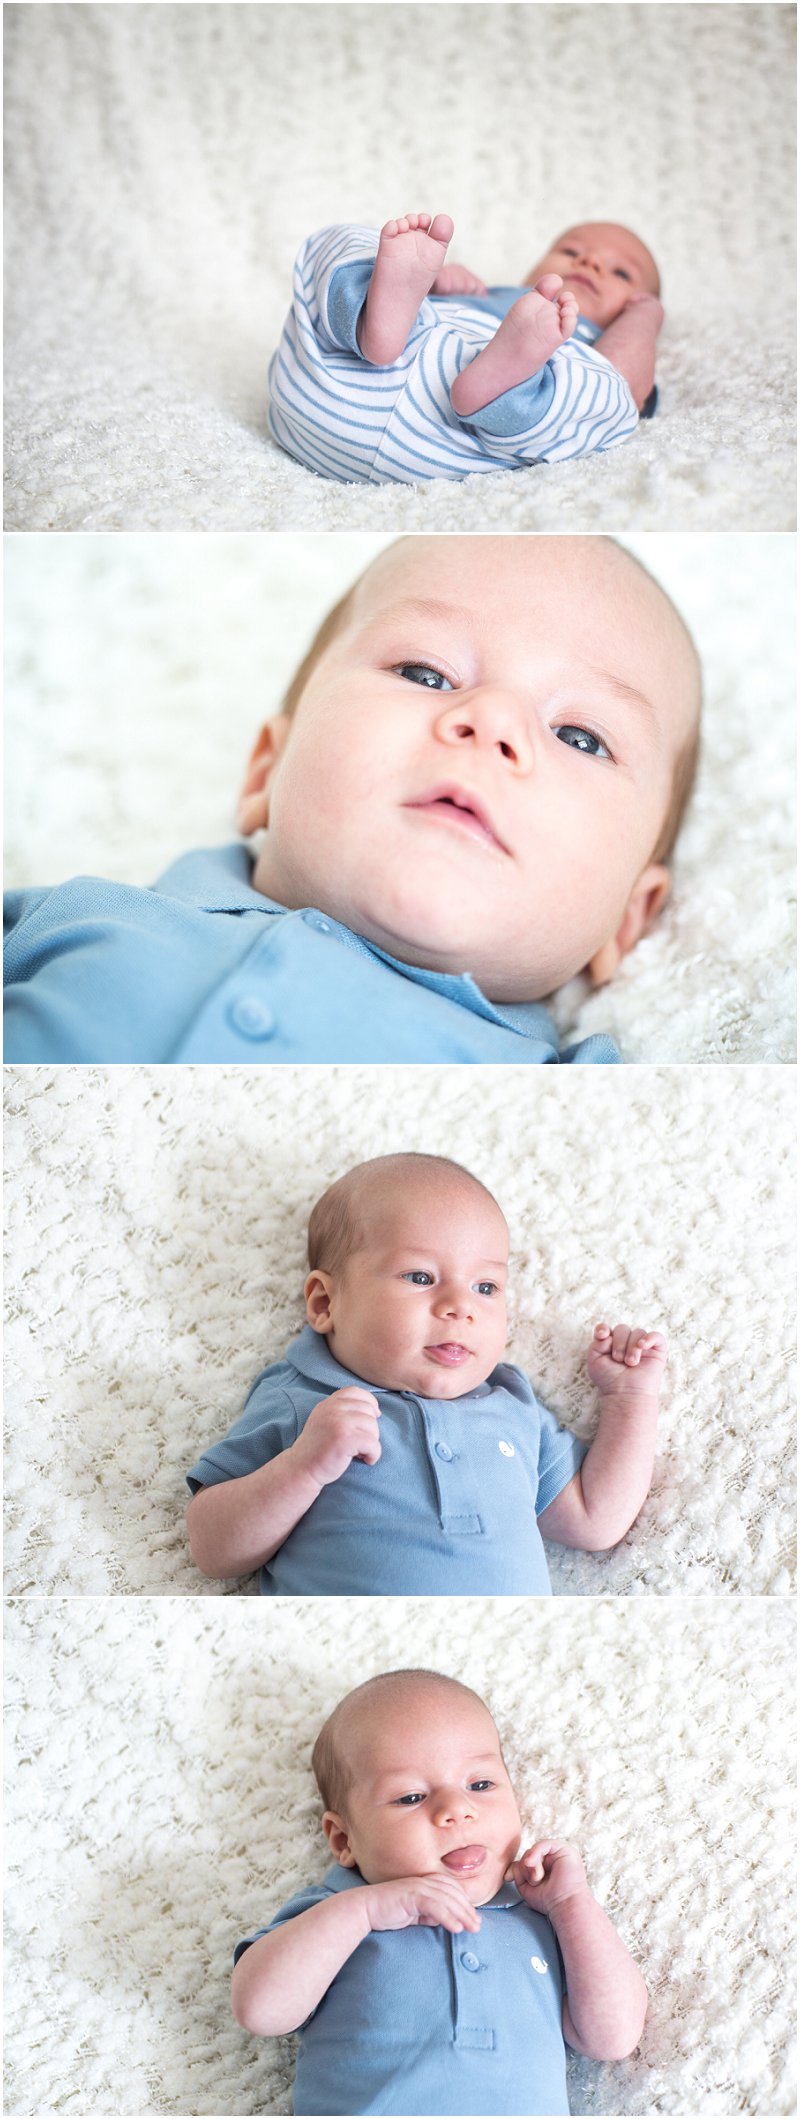 New baby photographer Preston gorgeous baby boy in blue during photo shoot